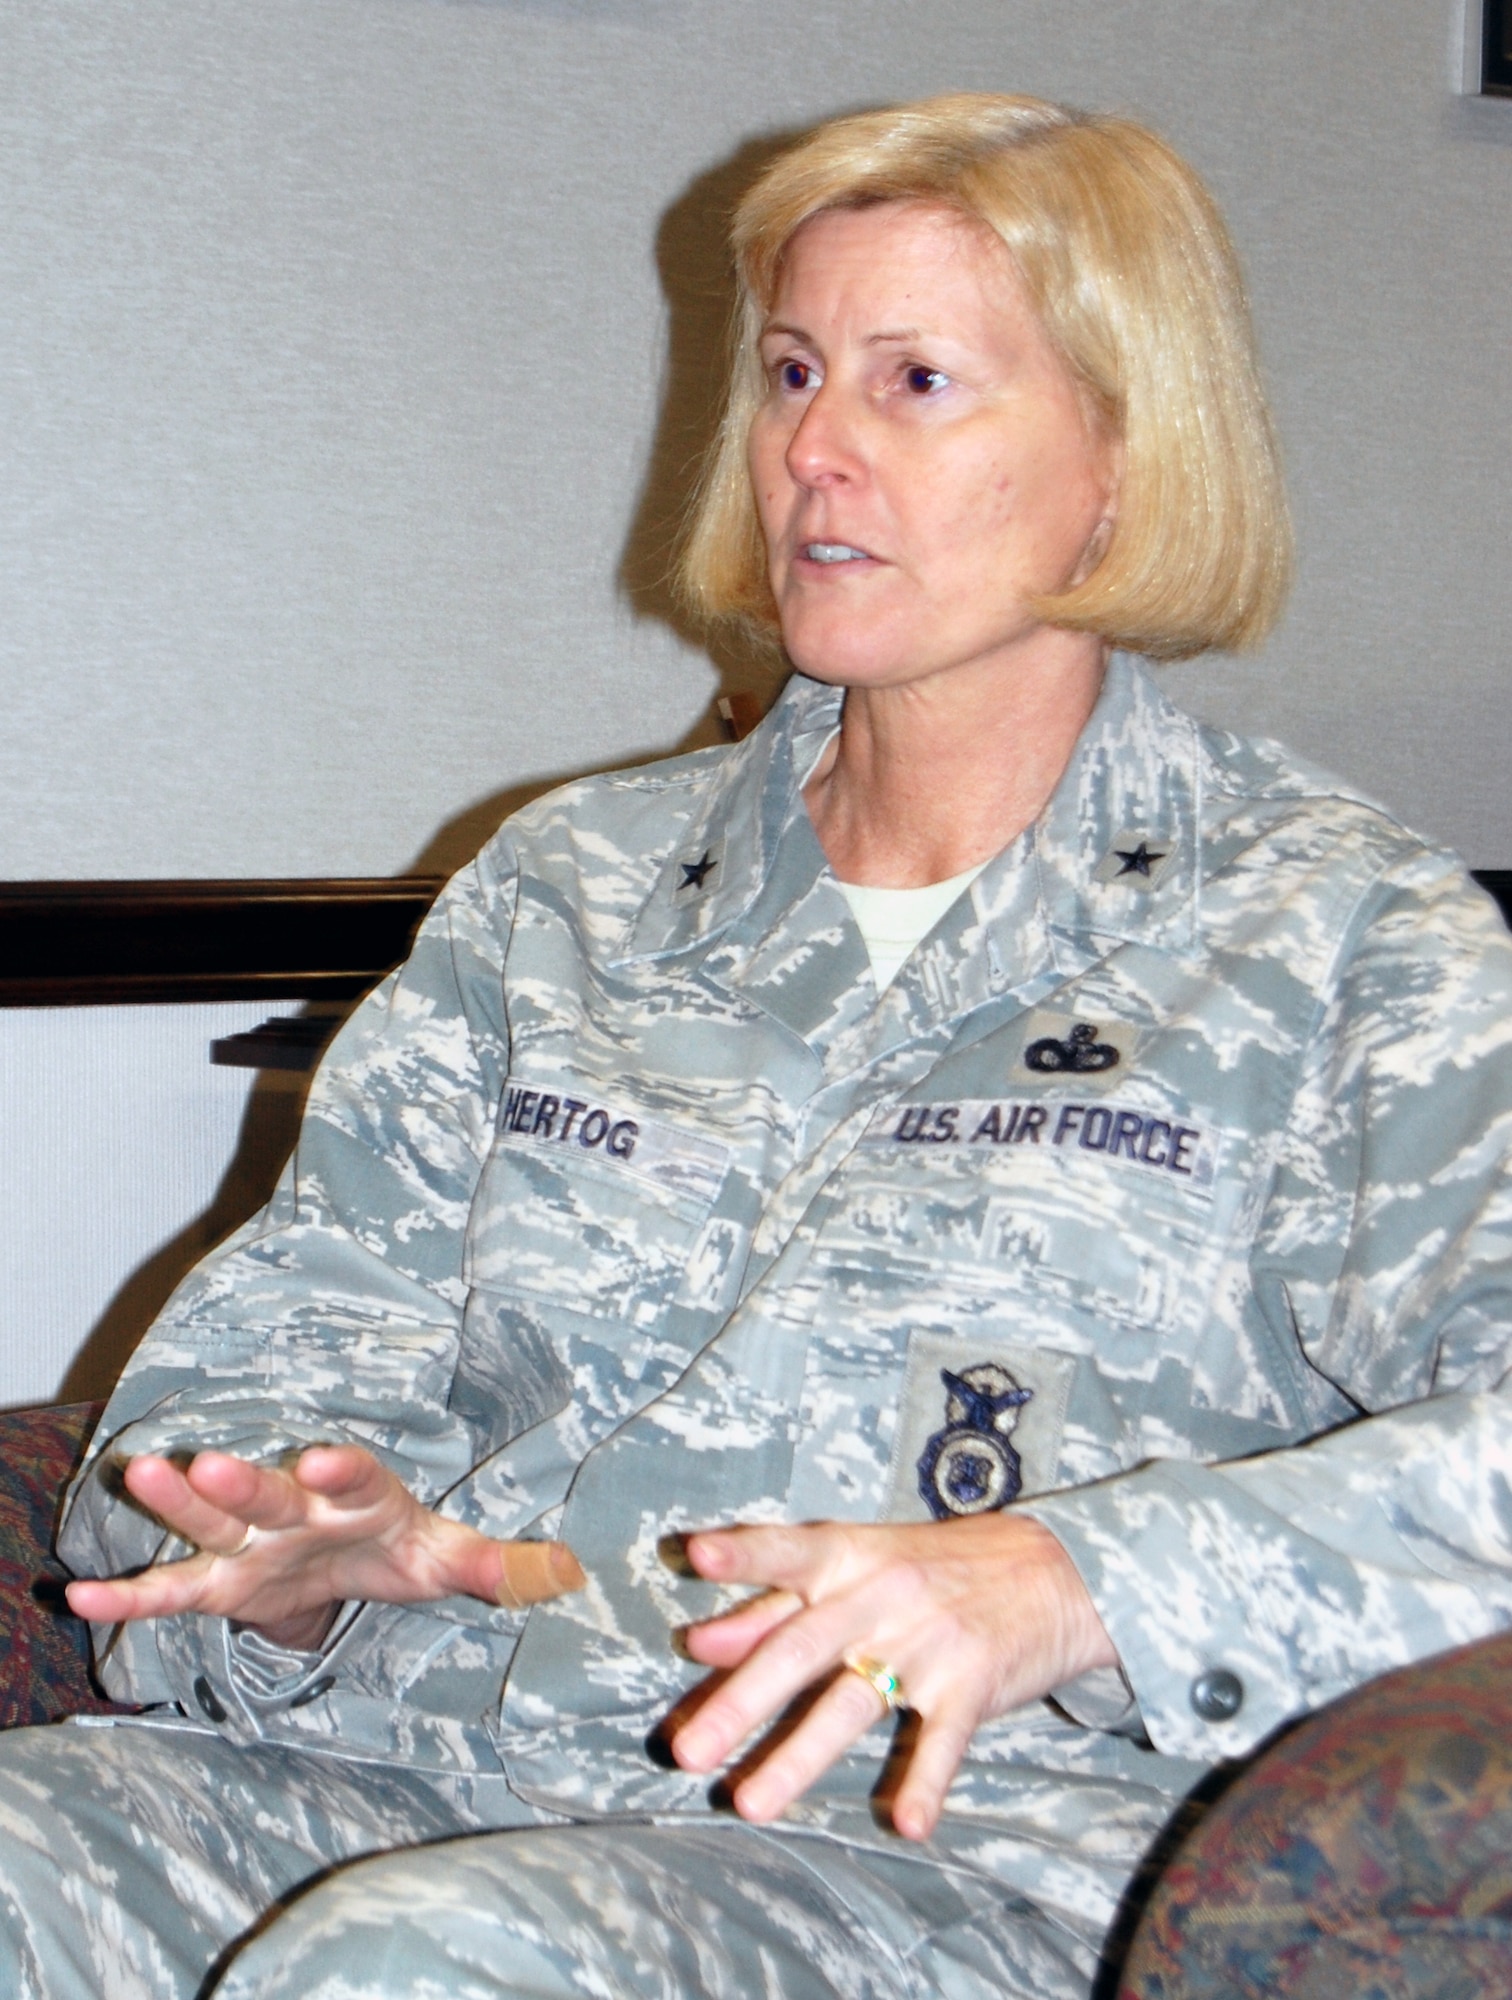 Brig. Gen. Mary Kay Hertog, the Air Force Director of Security Forces at the Pentagon in Arlington, Va., talks during an interview in the U.S. Air Force Expeditionary Center on Fort Dix, N.J., on March 26, 2009.  General Hertog is the first female security forces officer to hold the top Air Forces security forces post and held a video-teleconferenced briefing to more than 15 locations world-wide as part of a professional speaker series at the Expeditionary Center.  (U.S. Air Force Photo/Tech. Sgt. Scott T. Sturkol)